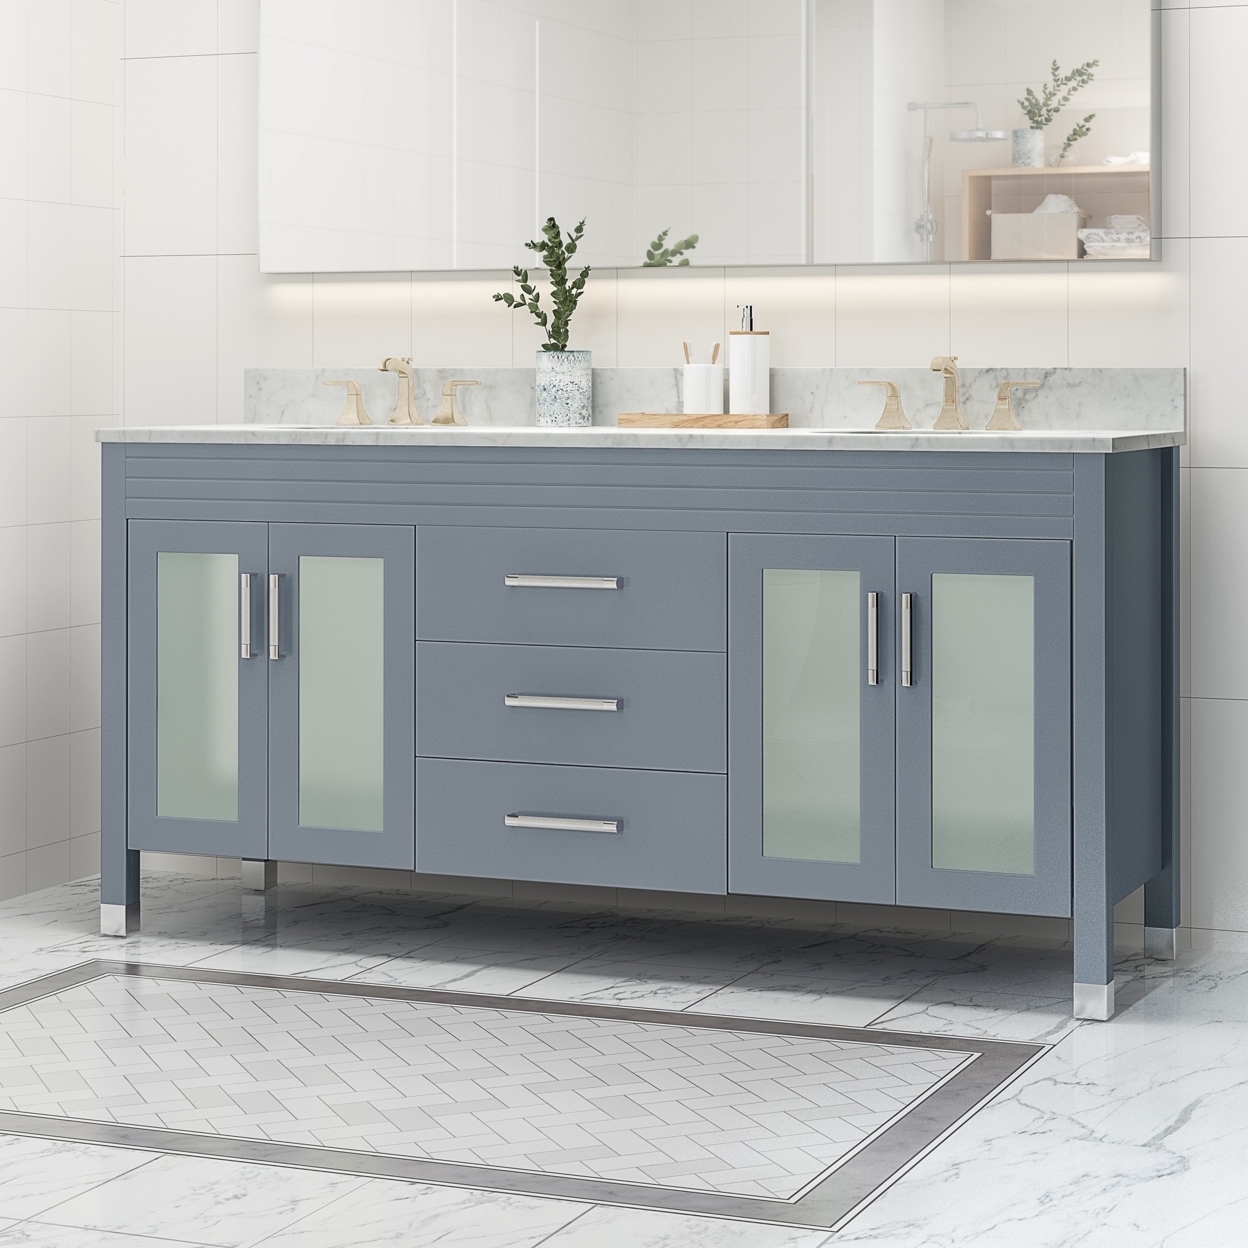 Holdame Contemporary 72 Wood Double Sink Bathroom Vanity With Marble Counter Top With Carrara White Marble - White